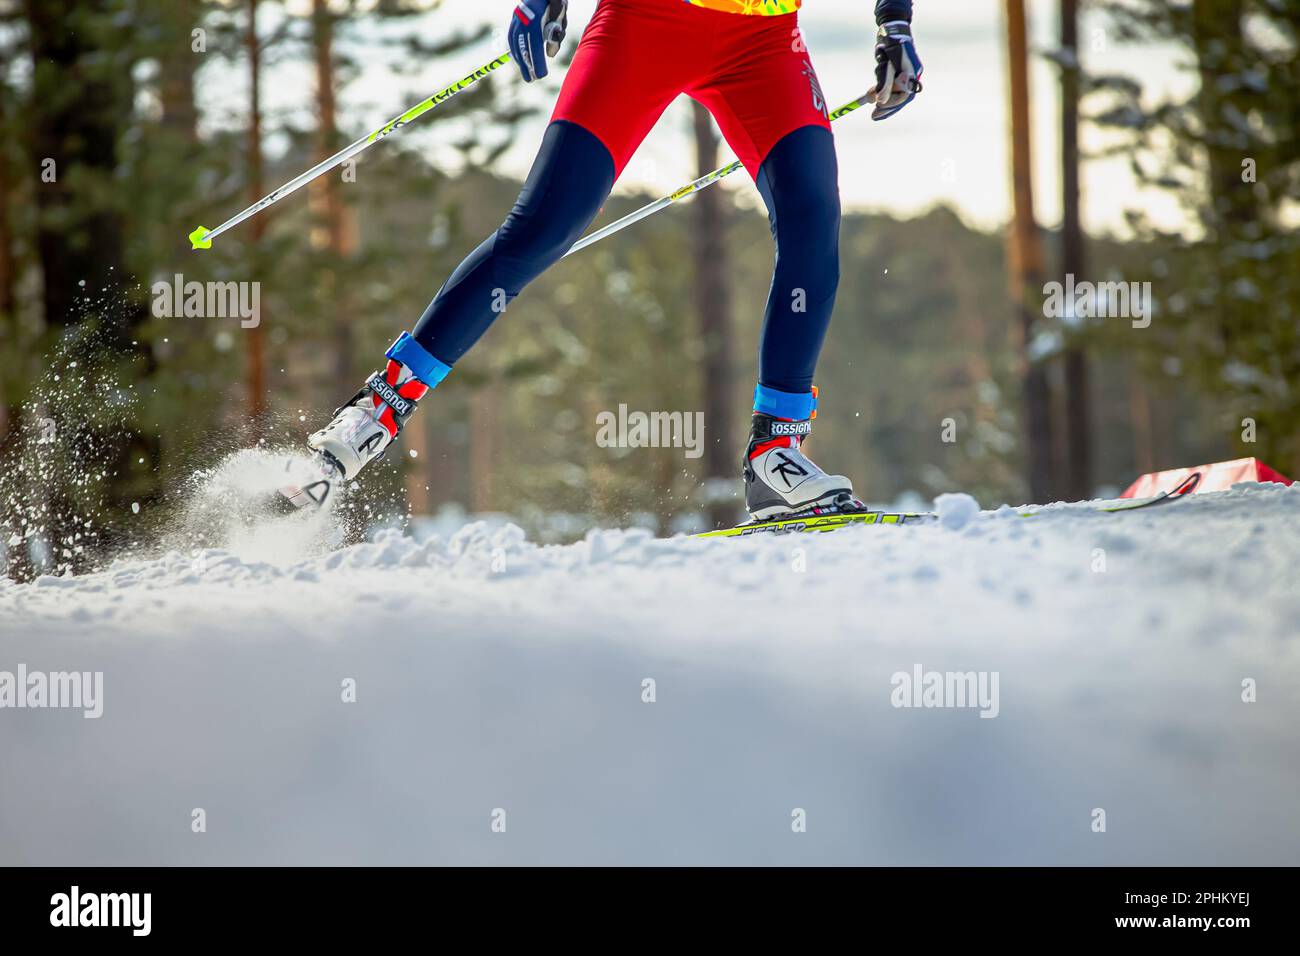 male skier running uphill in cross-country skiing, Fischer racing skis, Rossignol ski boots, winter olympic sports Stock Photo